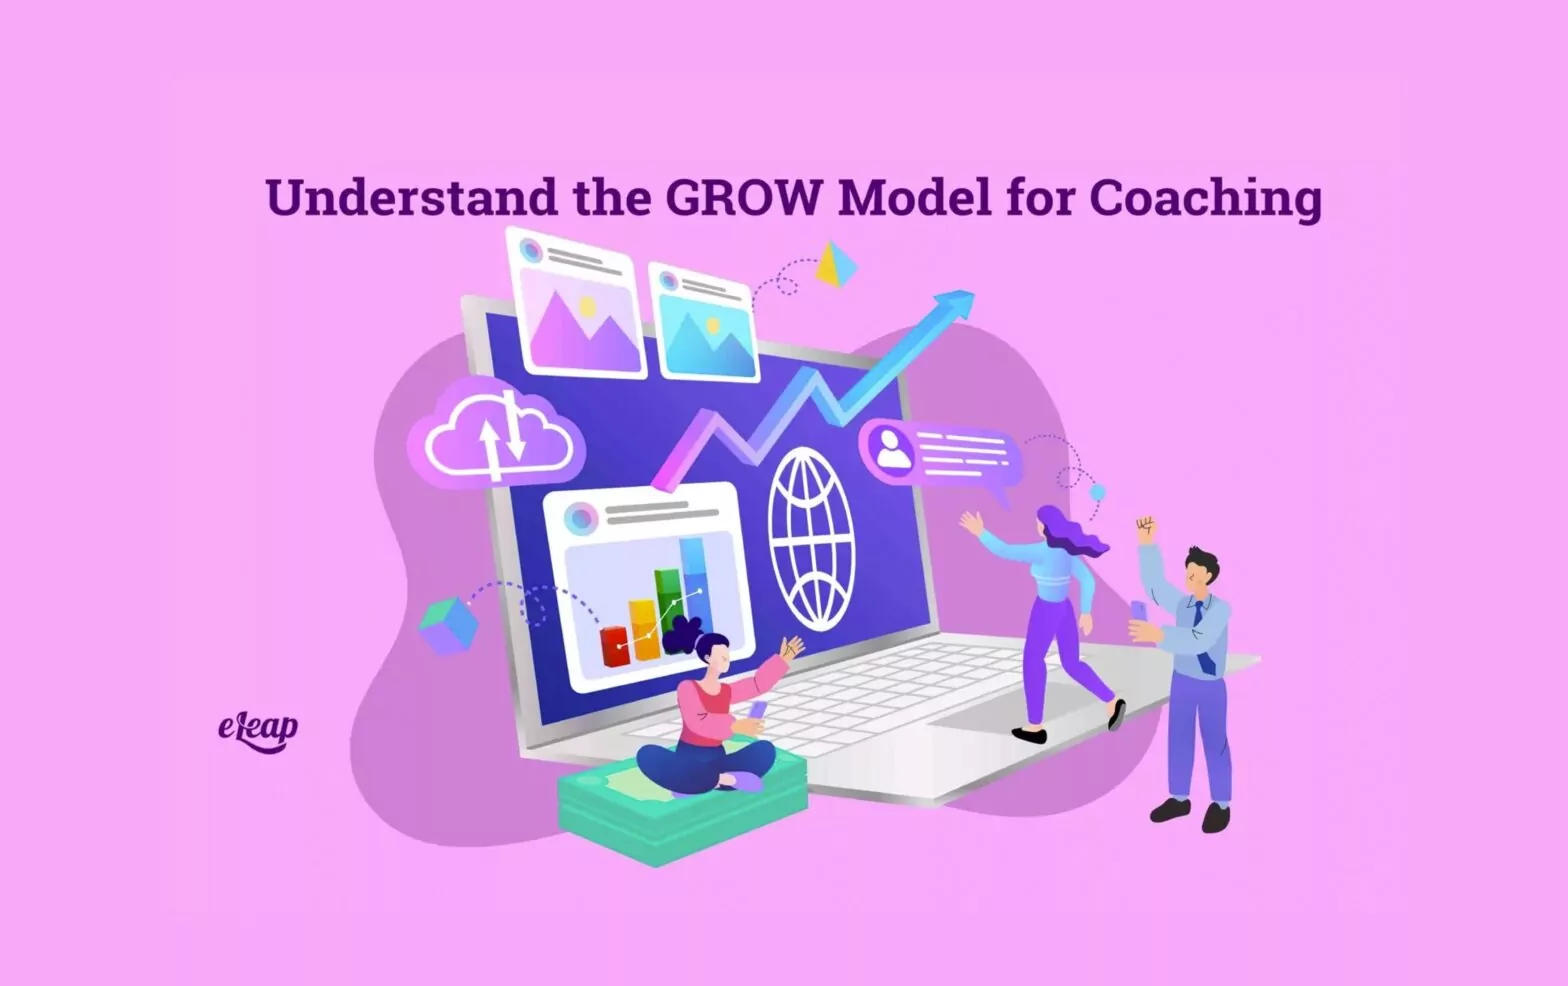 Understand the GROW Model for Coaching